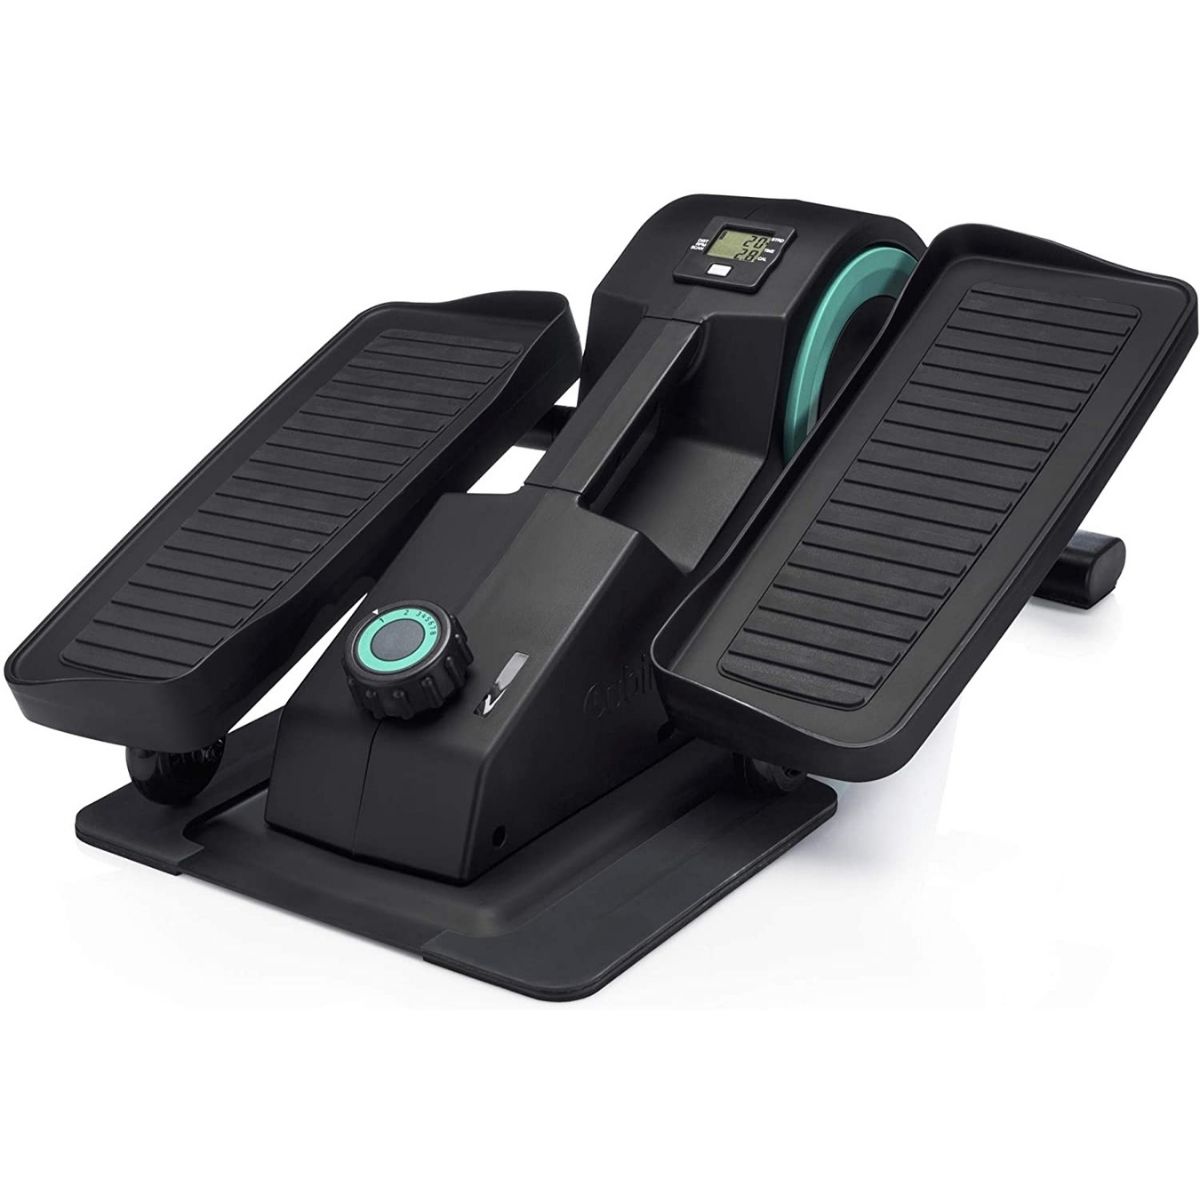 The Best Home Office Gifts Option: Cubii JR1 Seated Under Desk Elliptical Machine